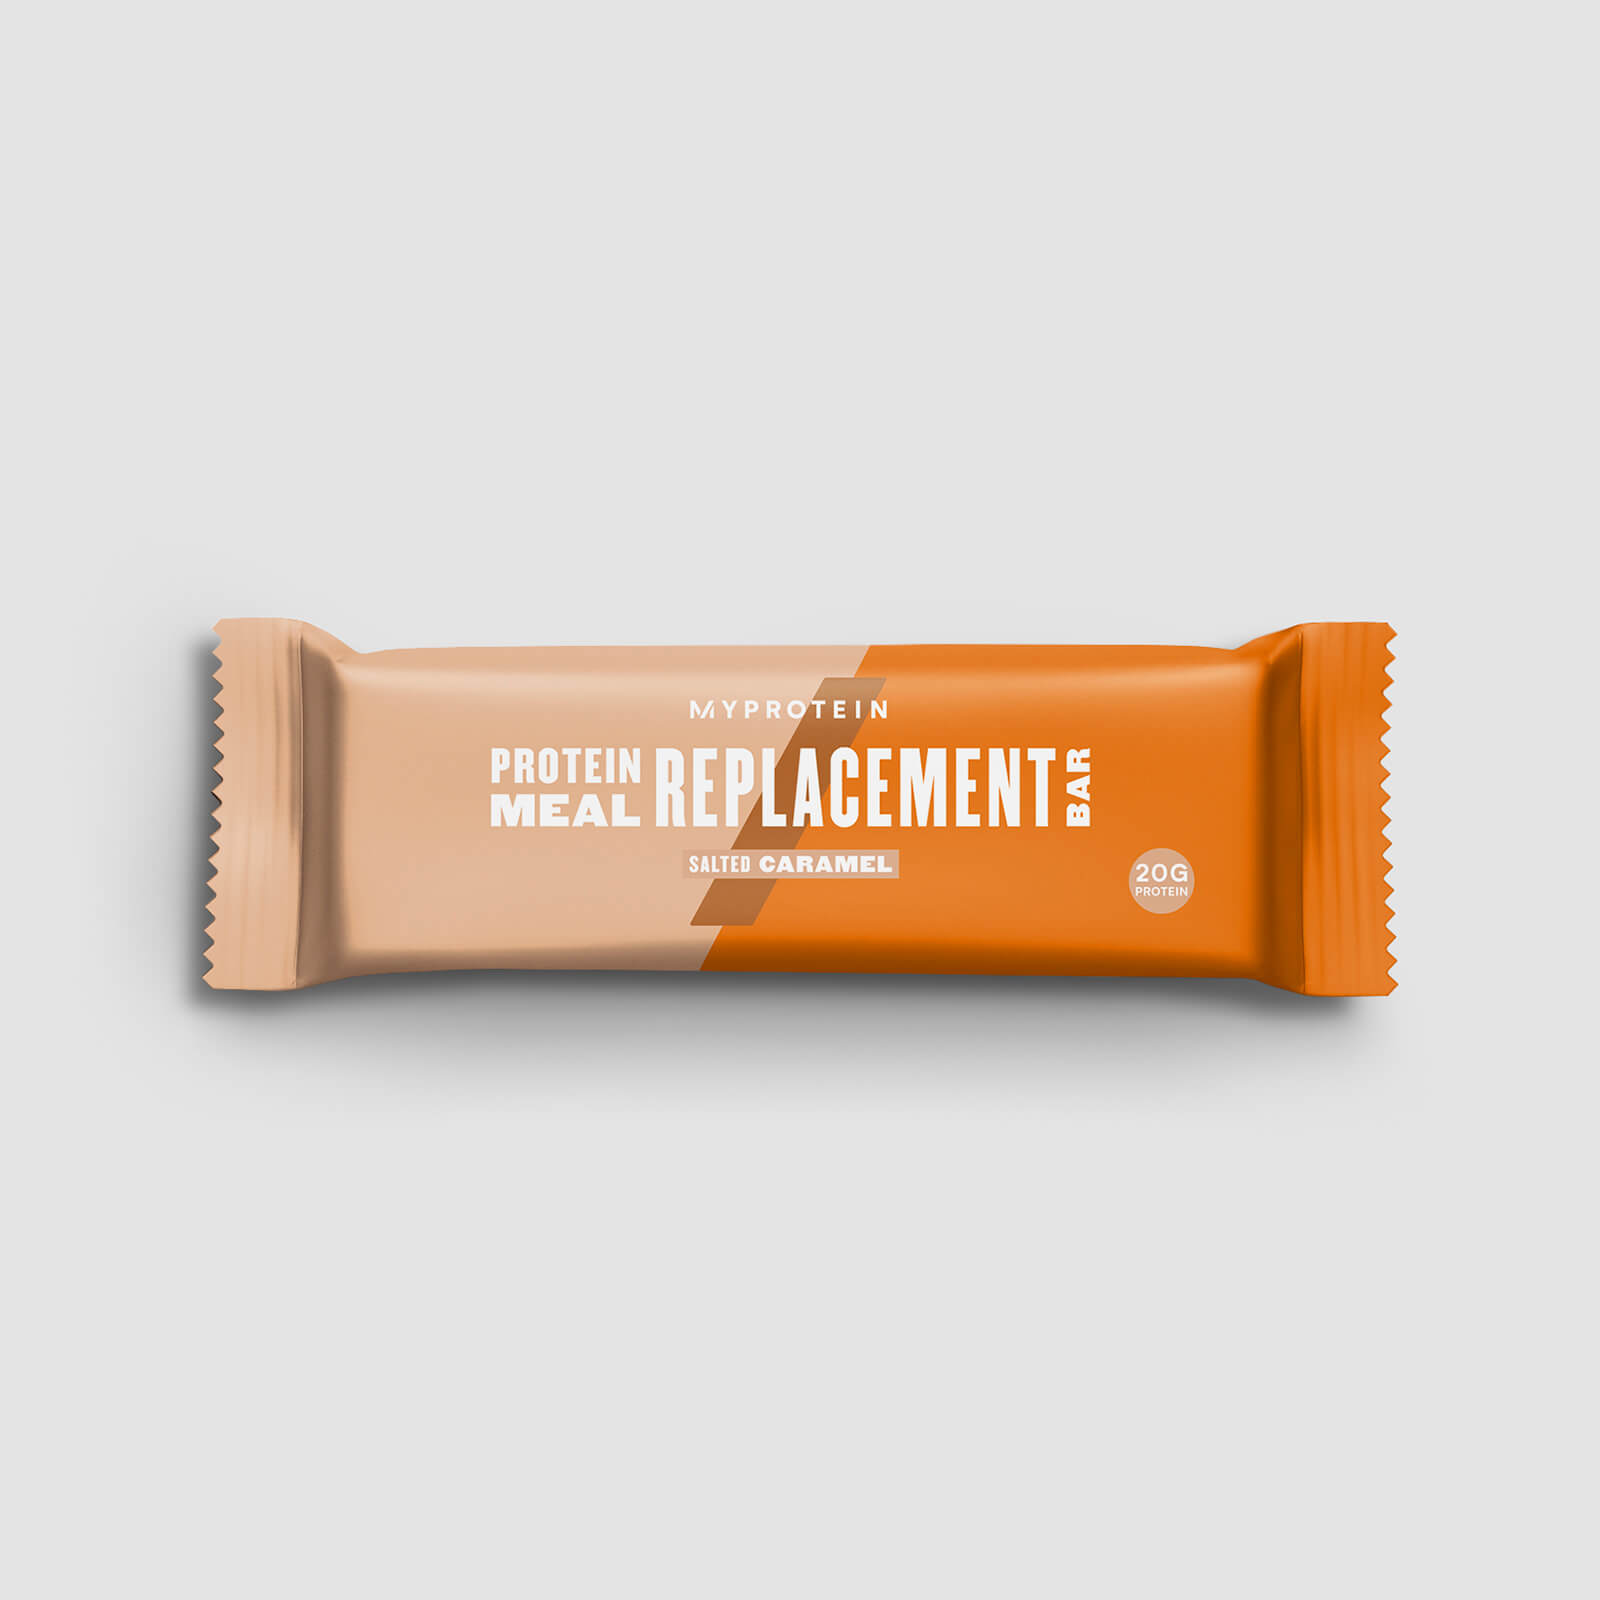 Protein Meal Replacement Bar (Sample)